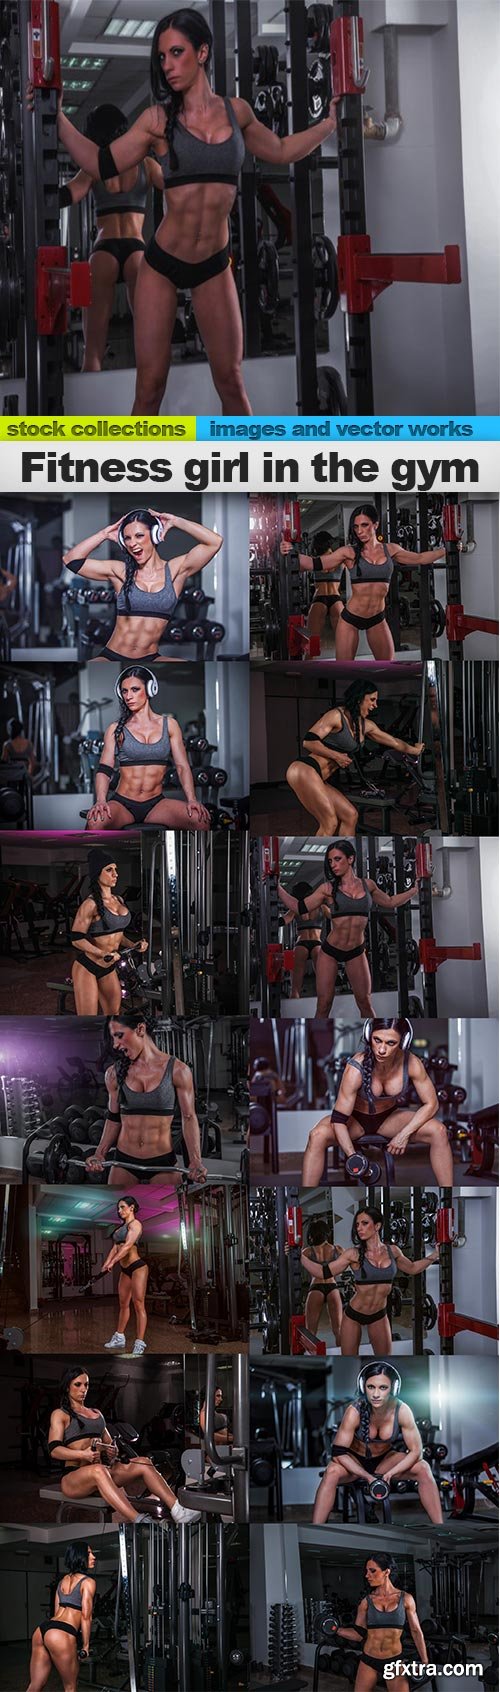 Fitness girl in the gym, 14 x UHQ JPEG